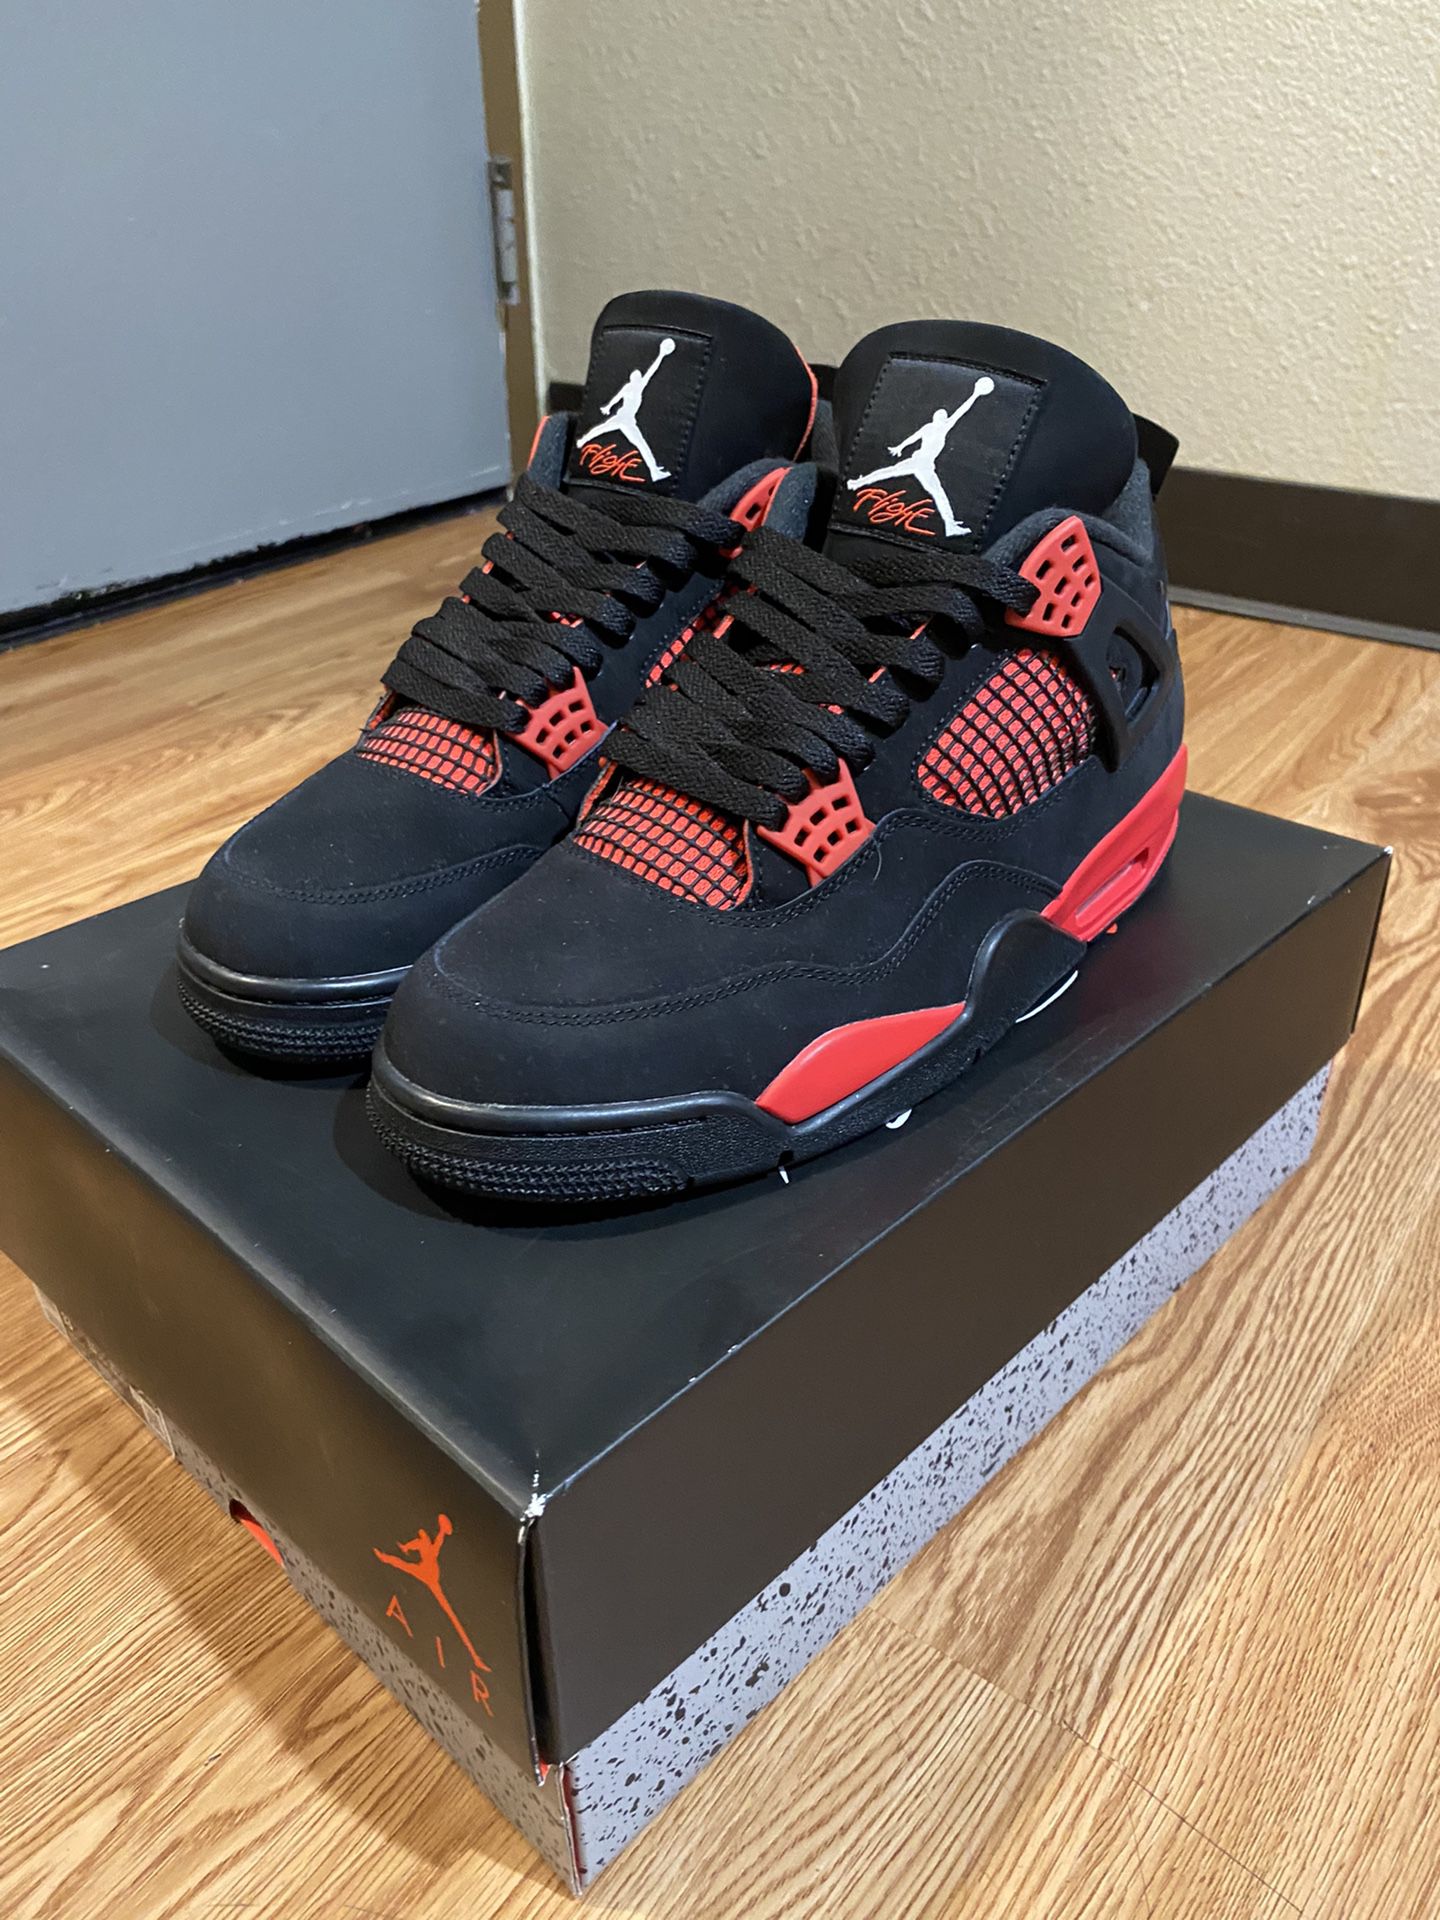 Red Thunder 4s size 11.5 